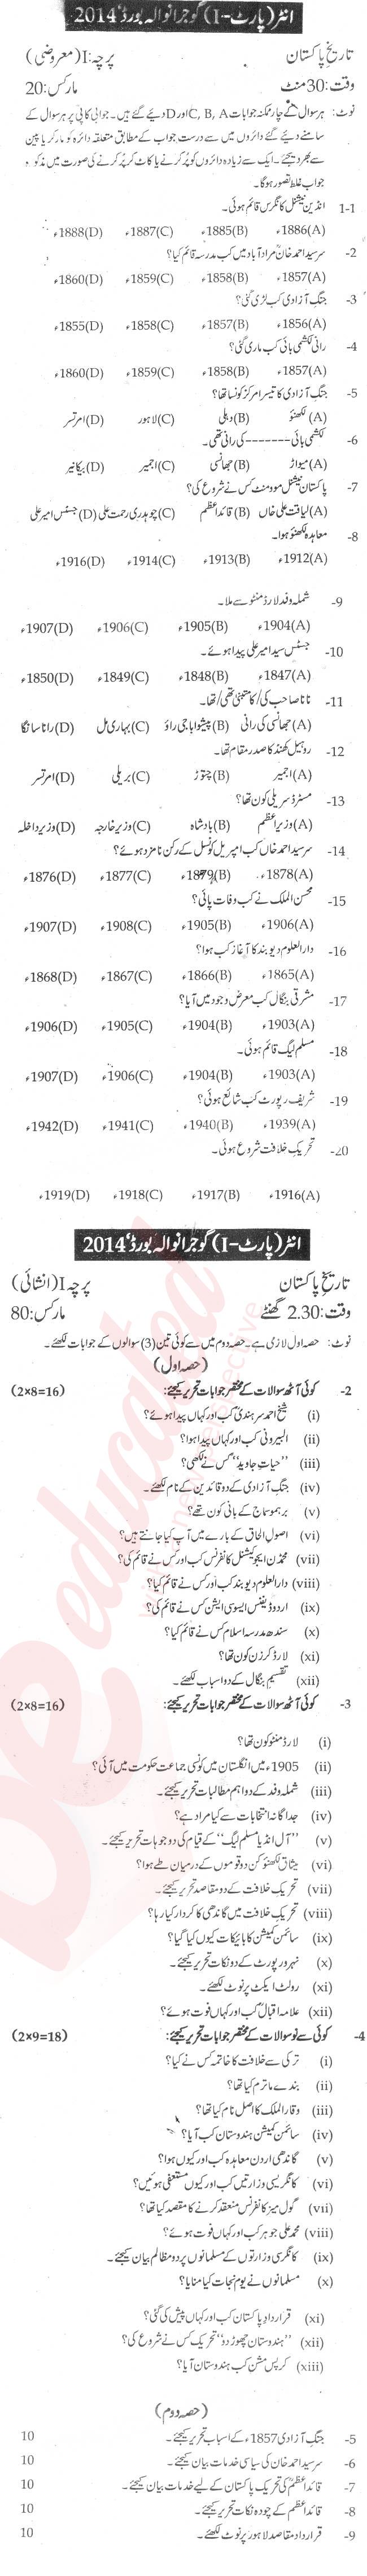 Pakistan History FA Part 1 Past Paper Group 1 BISE Gujranwala 2014